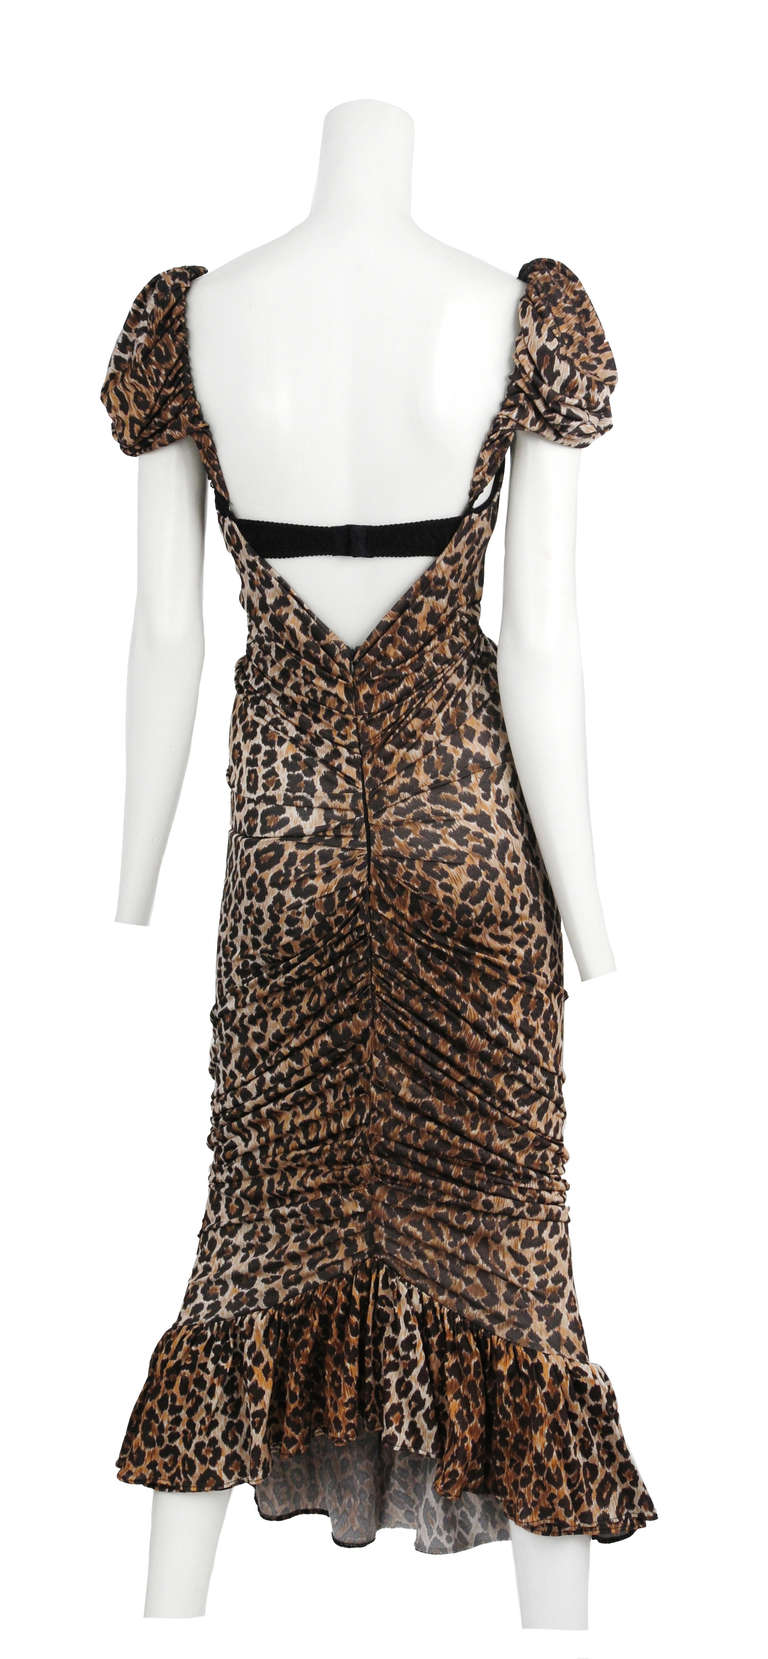 Dolce and Gabbana leopard jersey backless gown with built in lingerie style bra and shoulder detail.